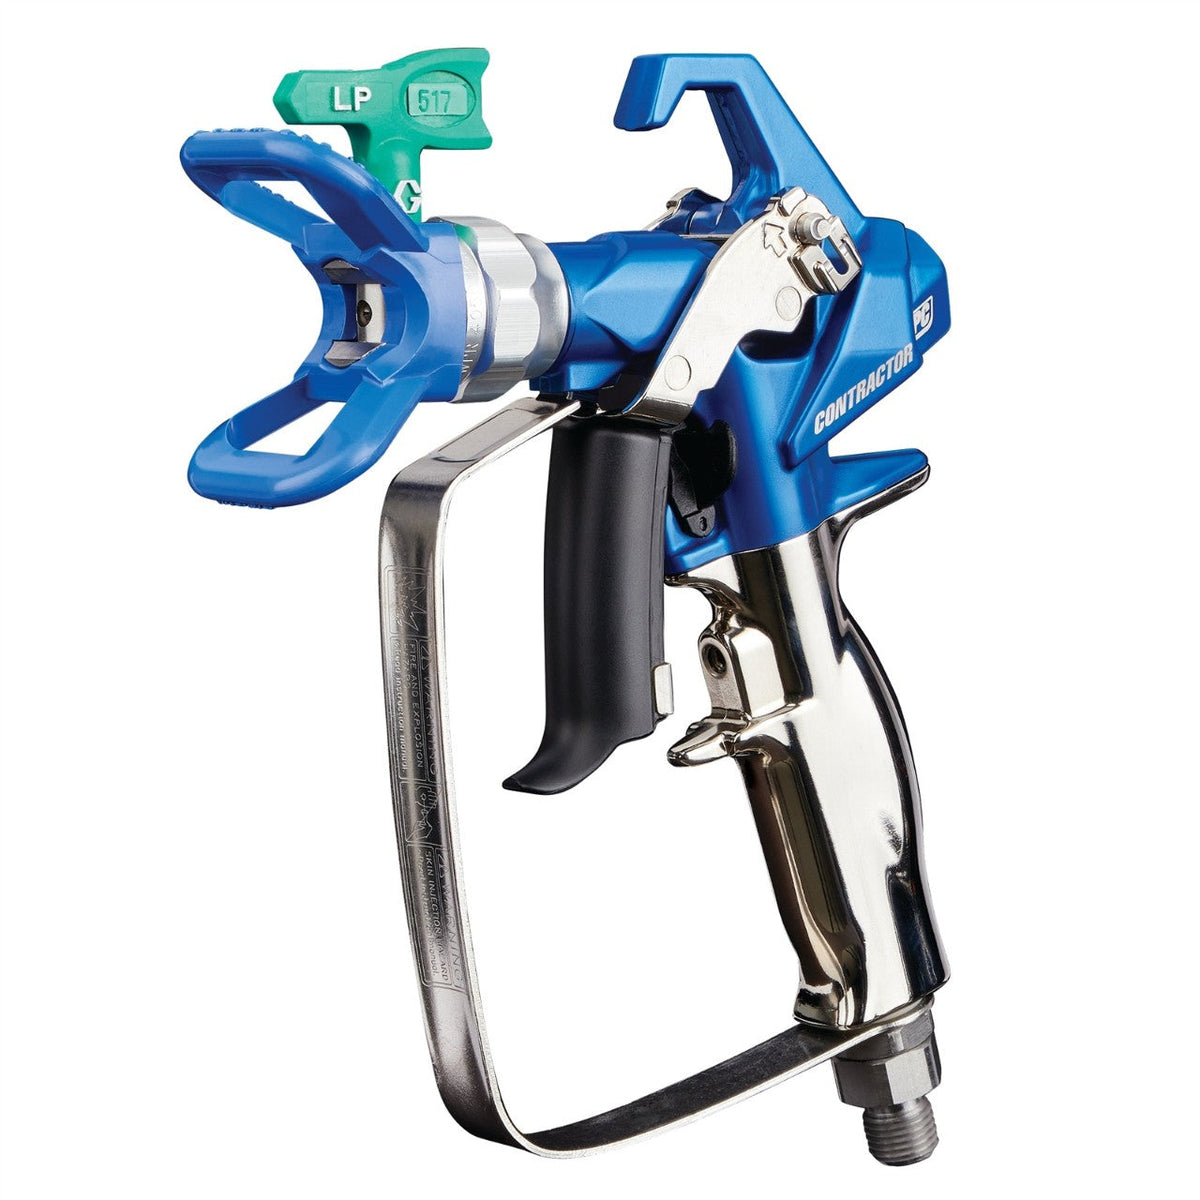 Graco 17Y043 Contractor PC Airless Spray Gun with RAC X LP 517 SwitchTip - The Paint People